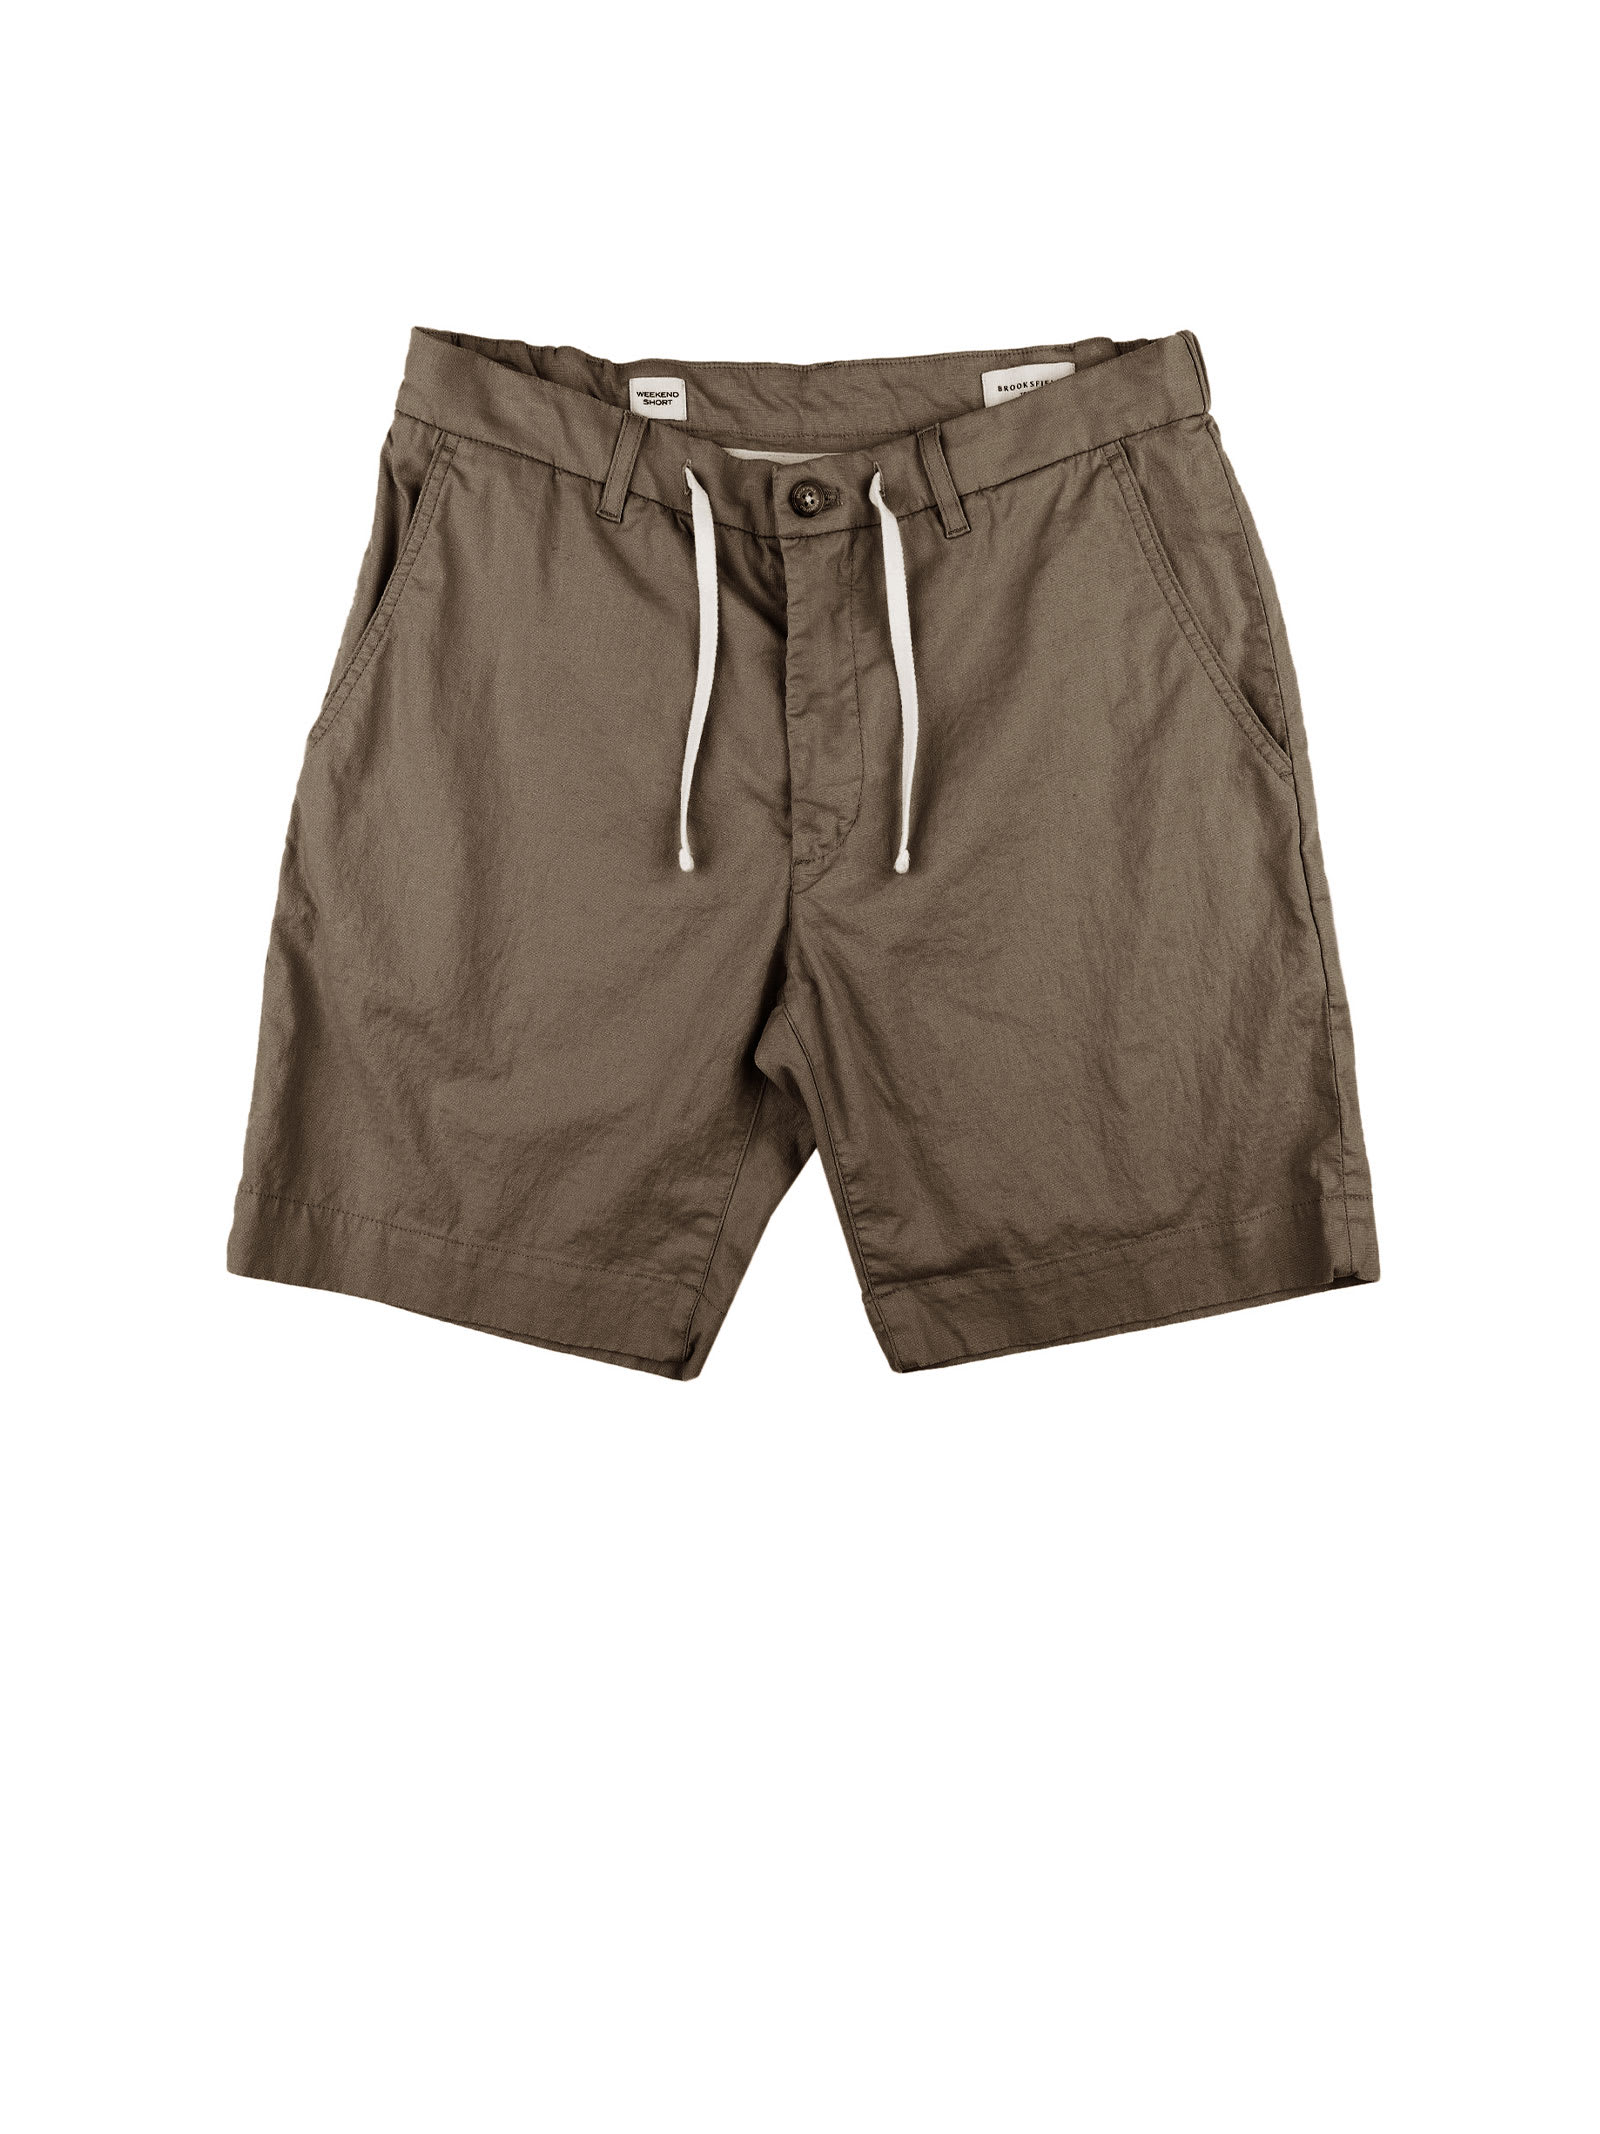 Brooksfield Bermuda Shorts With Belt Loops At The Waist